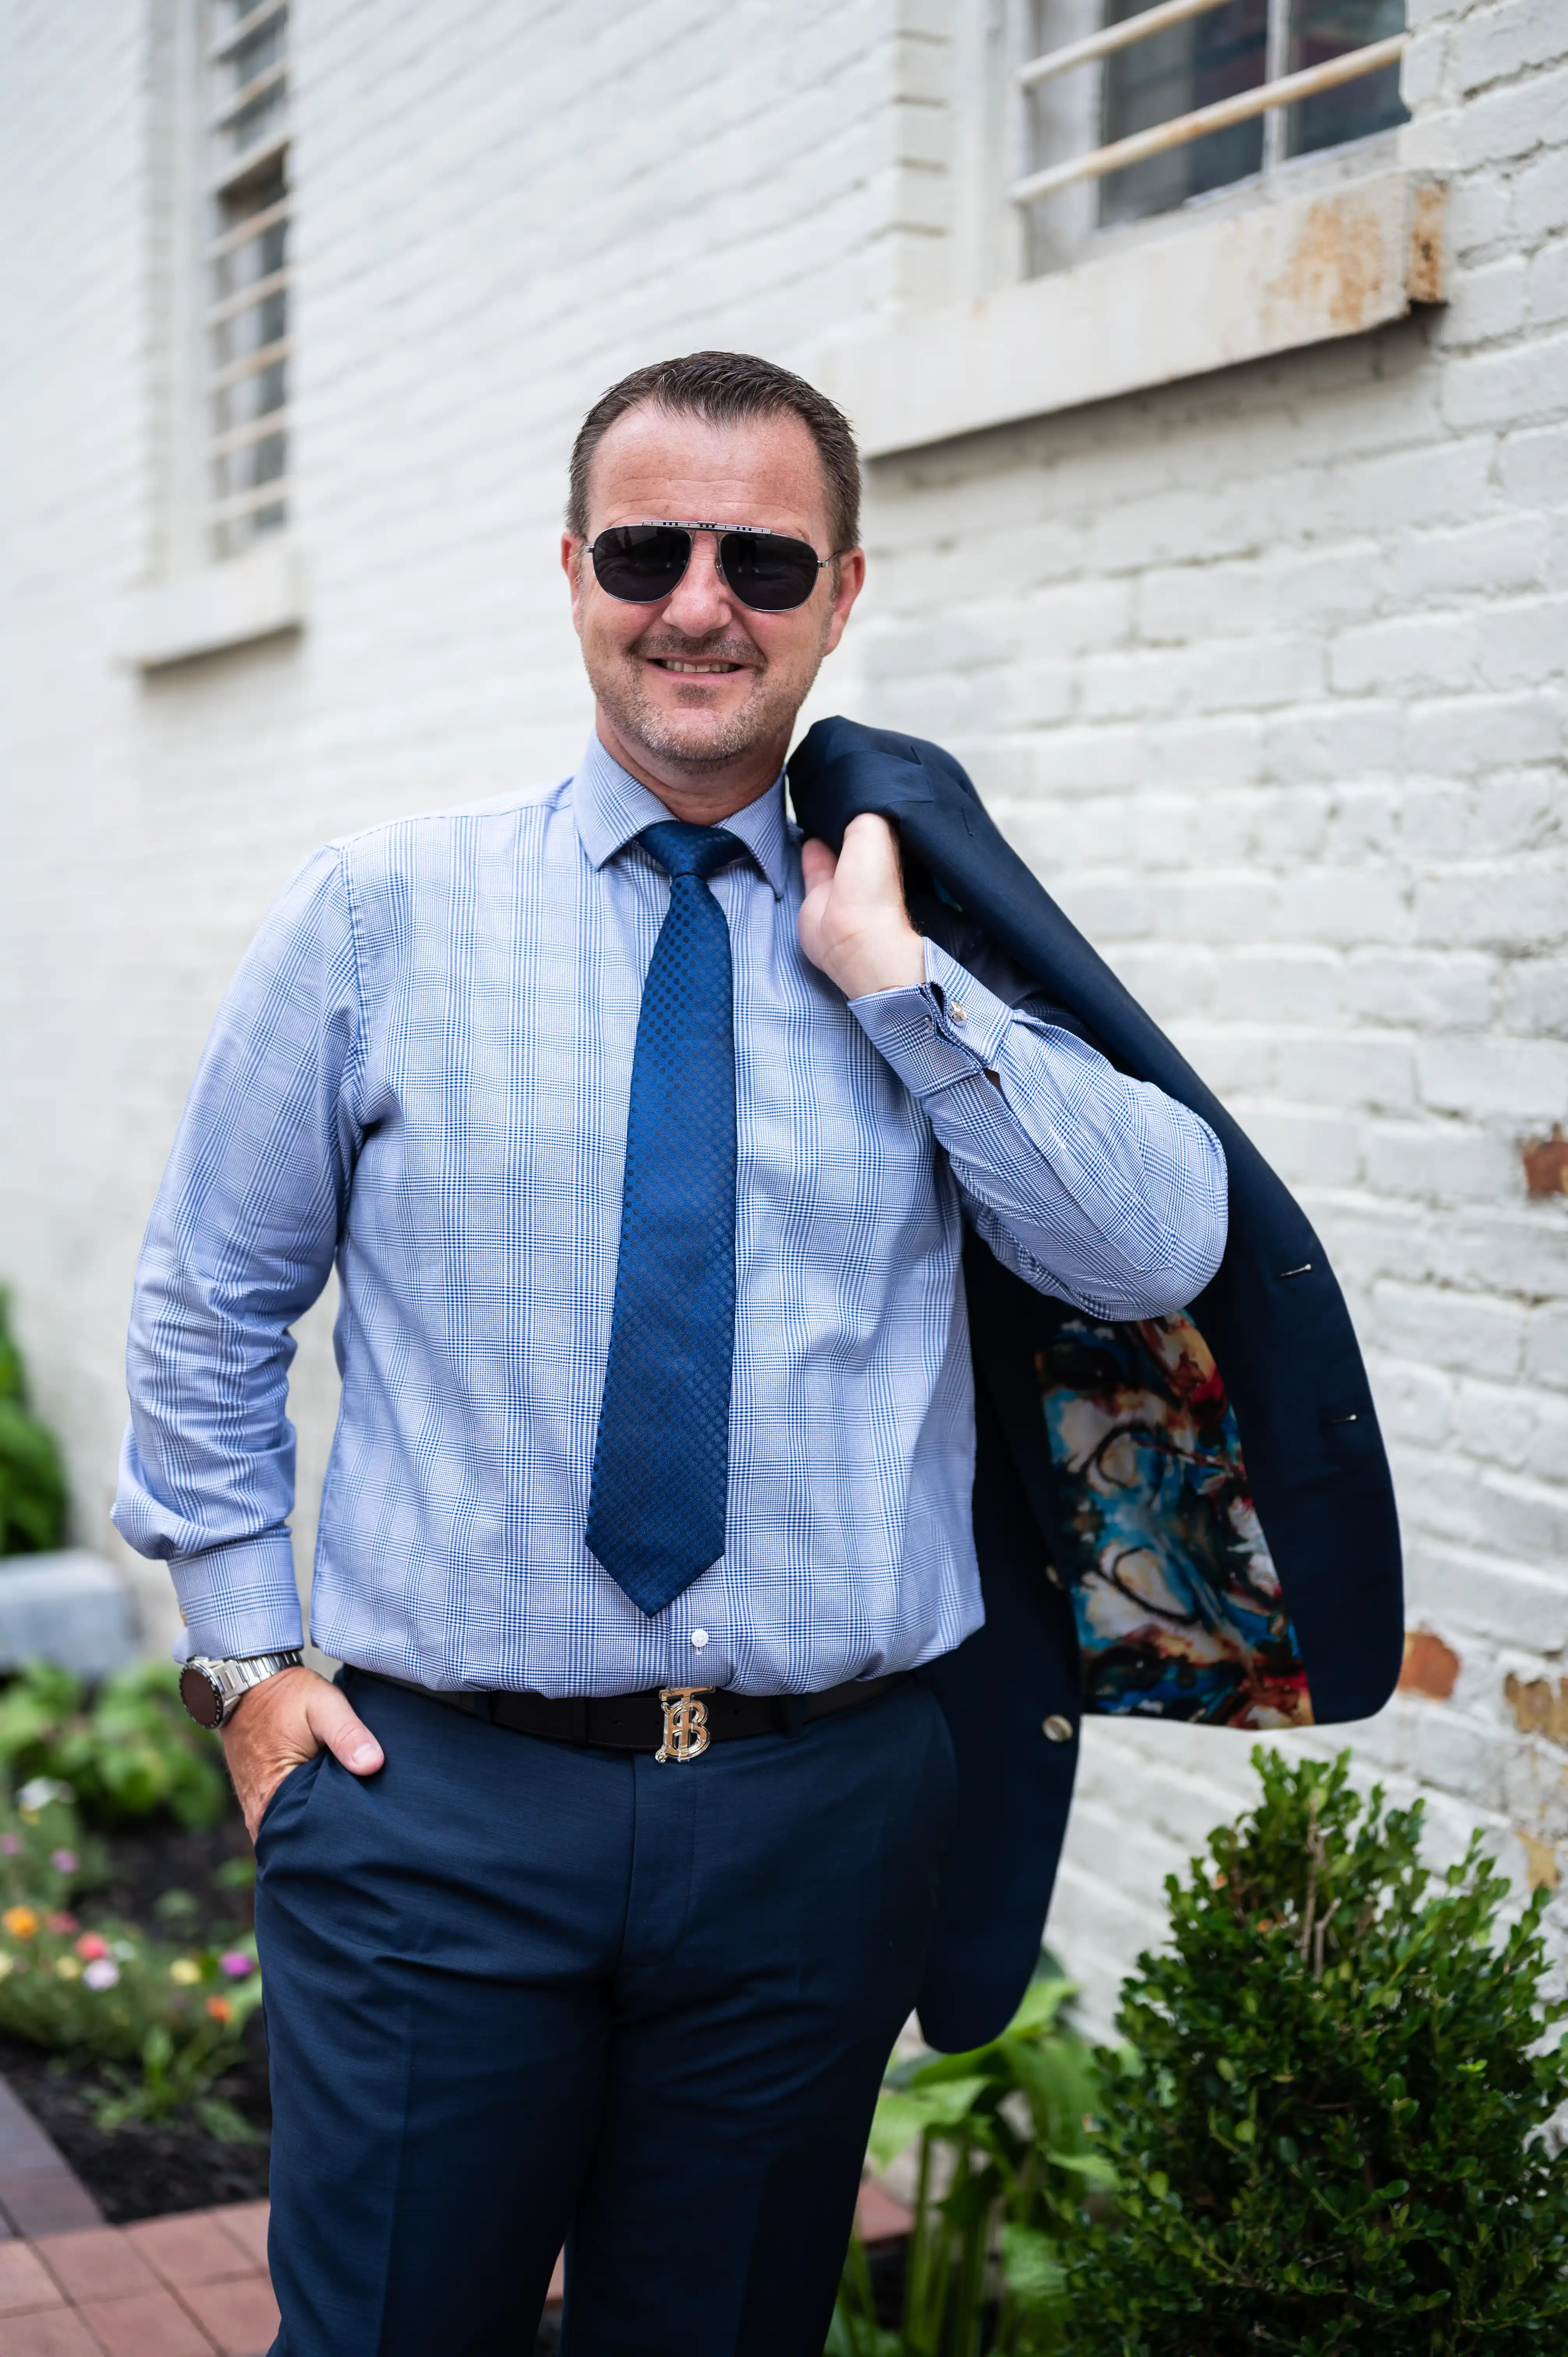 Confident businessman in a blue shirt and tie with sunglasses holding a jacket over his shoulder against a brick wall background.